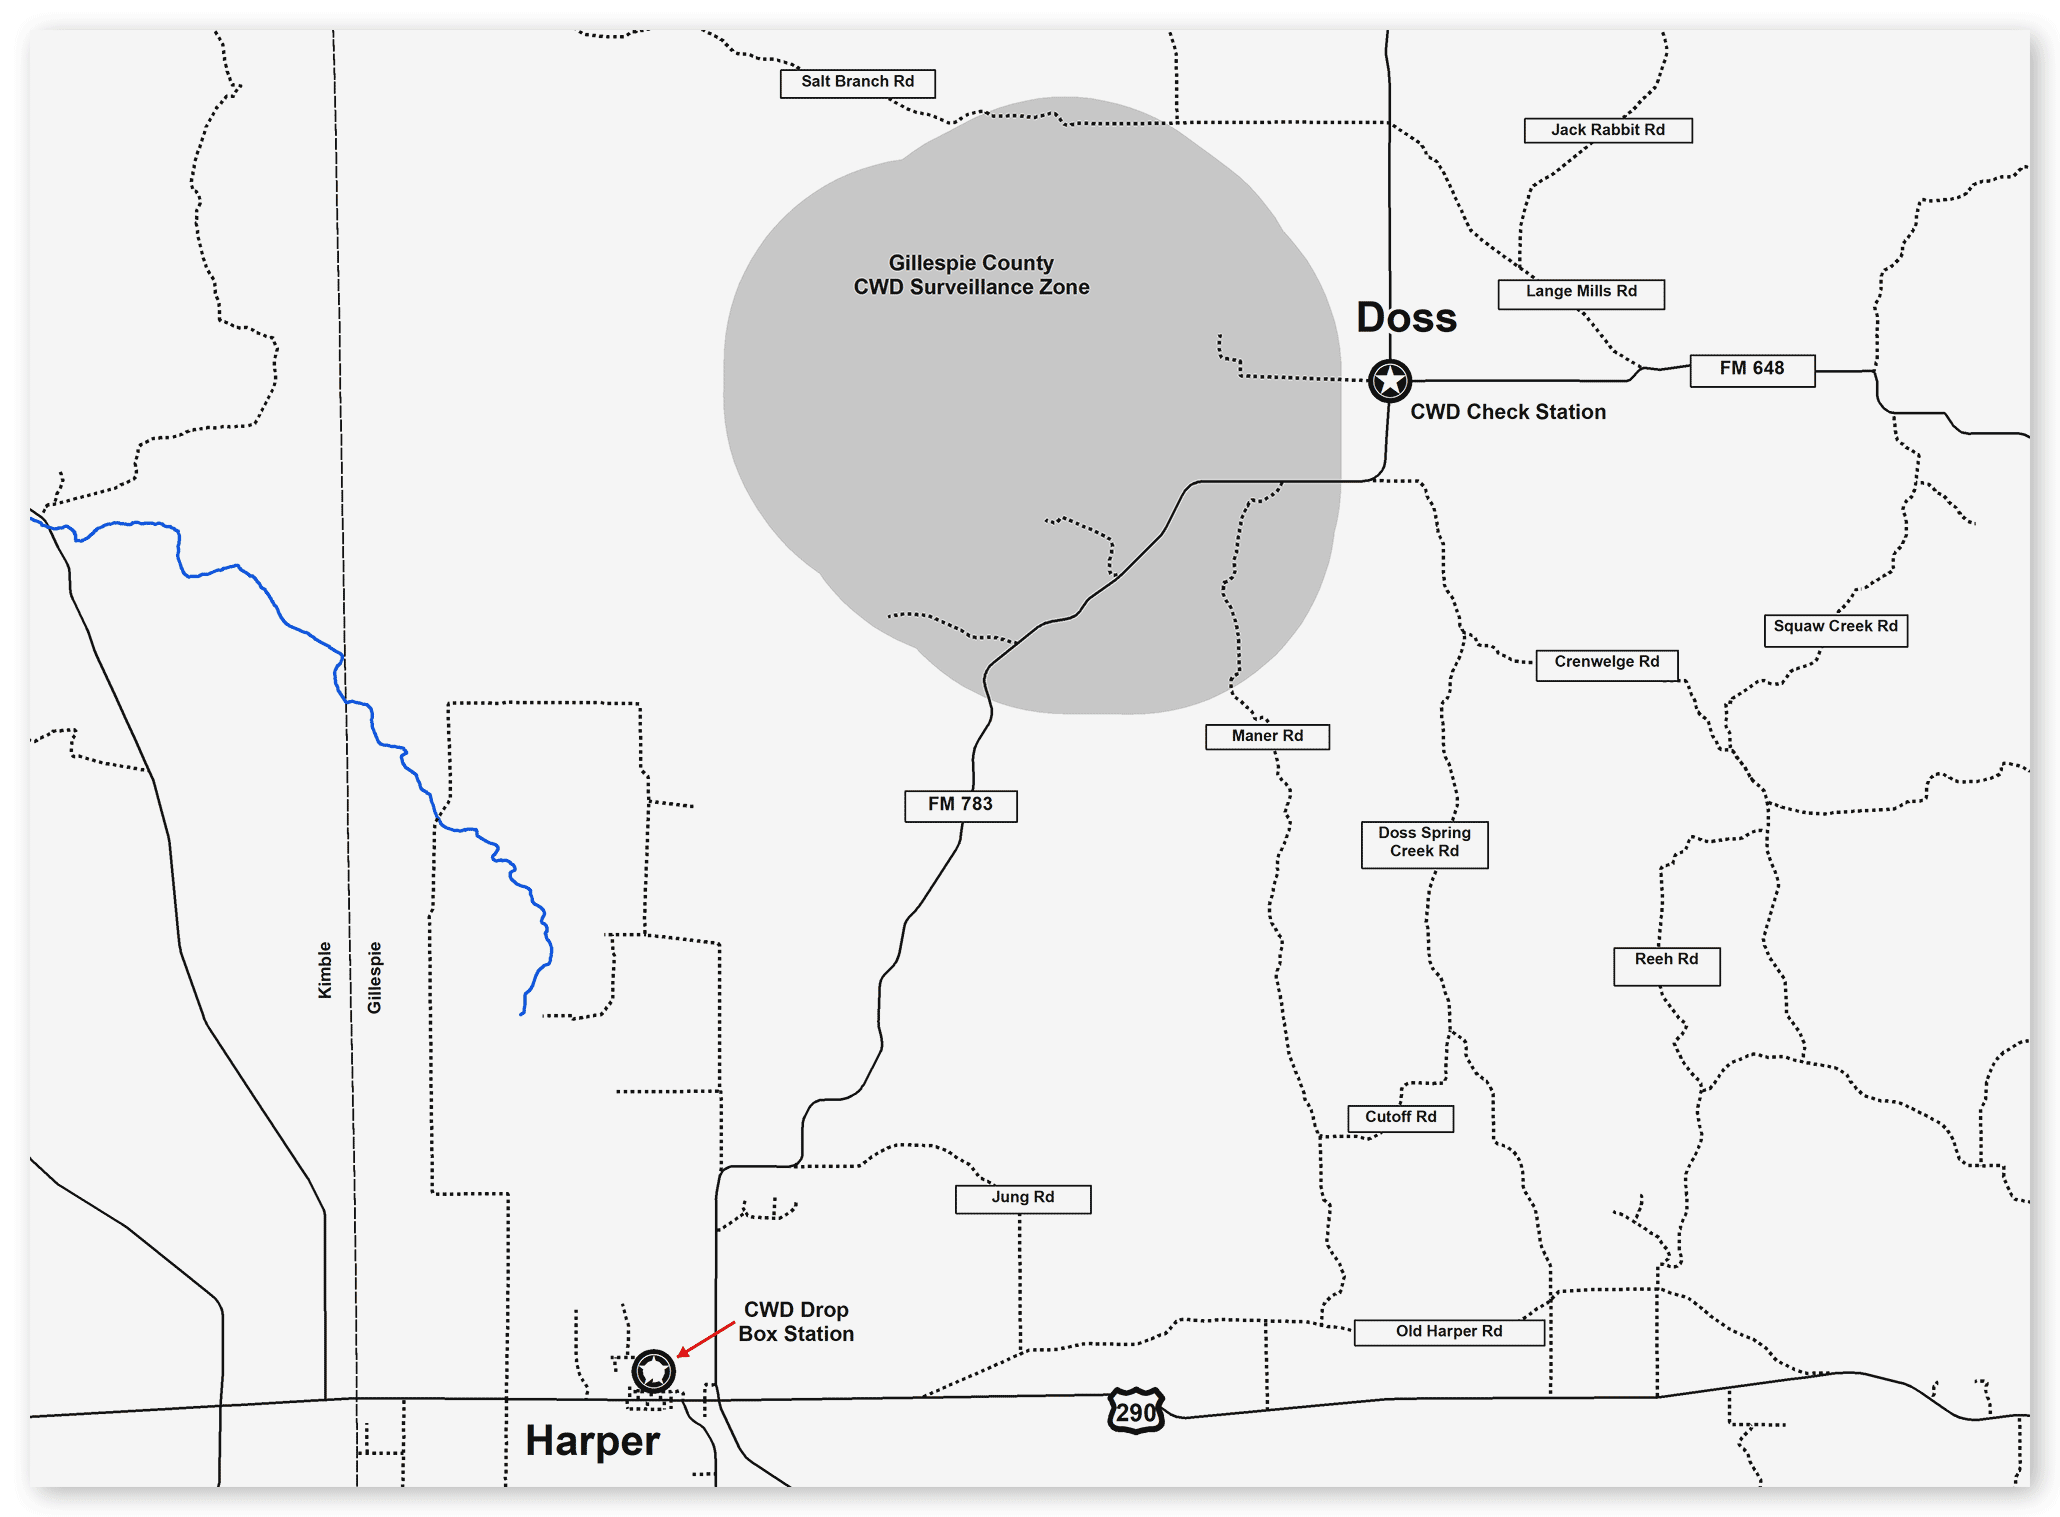 Map of Gillespie County CWD Zone